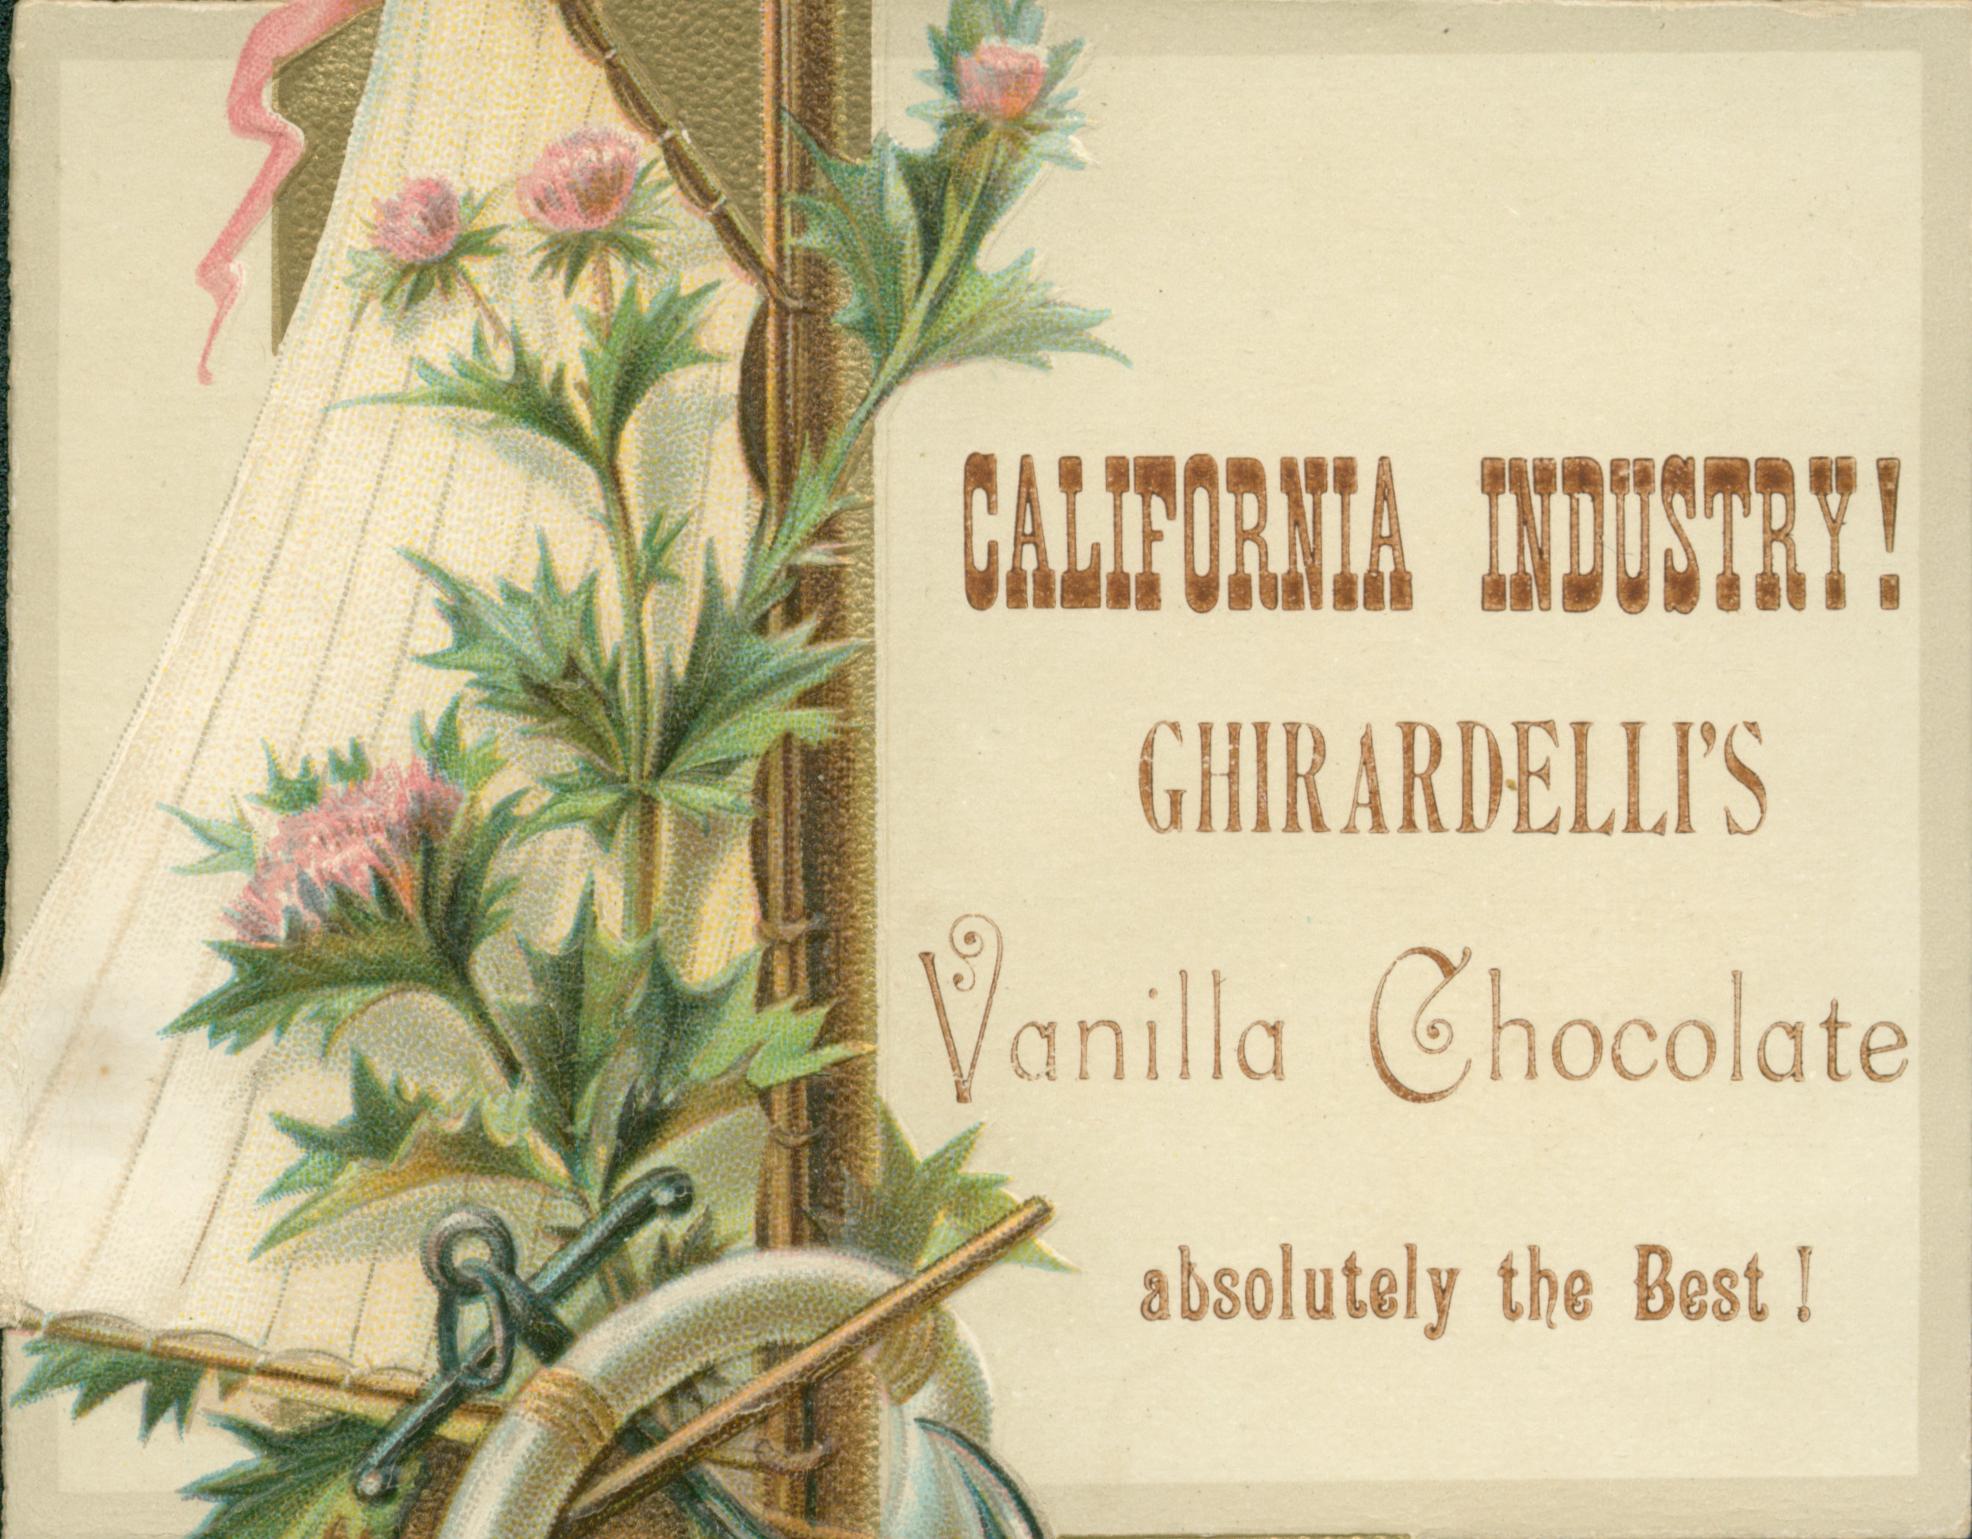 This Trade card shows a thistle in bloom climbing up the side of a sail. The title is to the right.